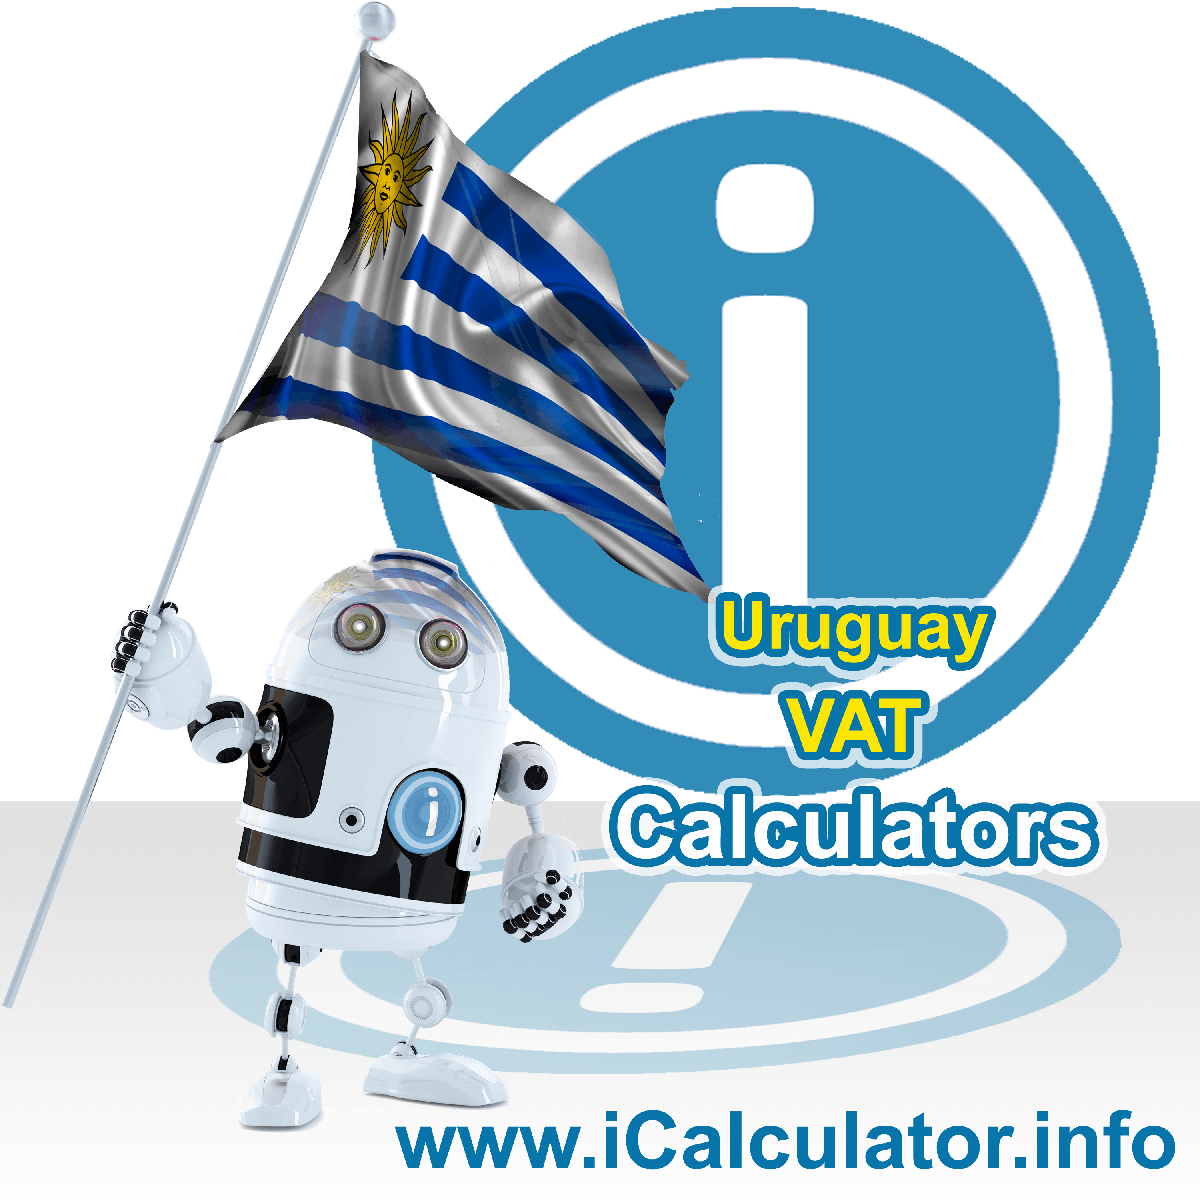 Uruguay VAT Calculator. This image shows the Uruguay flag and information relating to the VAT formula used for calculating Value Added Tax in Uruguay using the Uruguay VAT Calculator in 2023